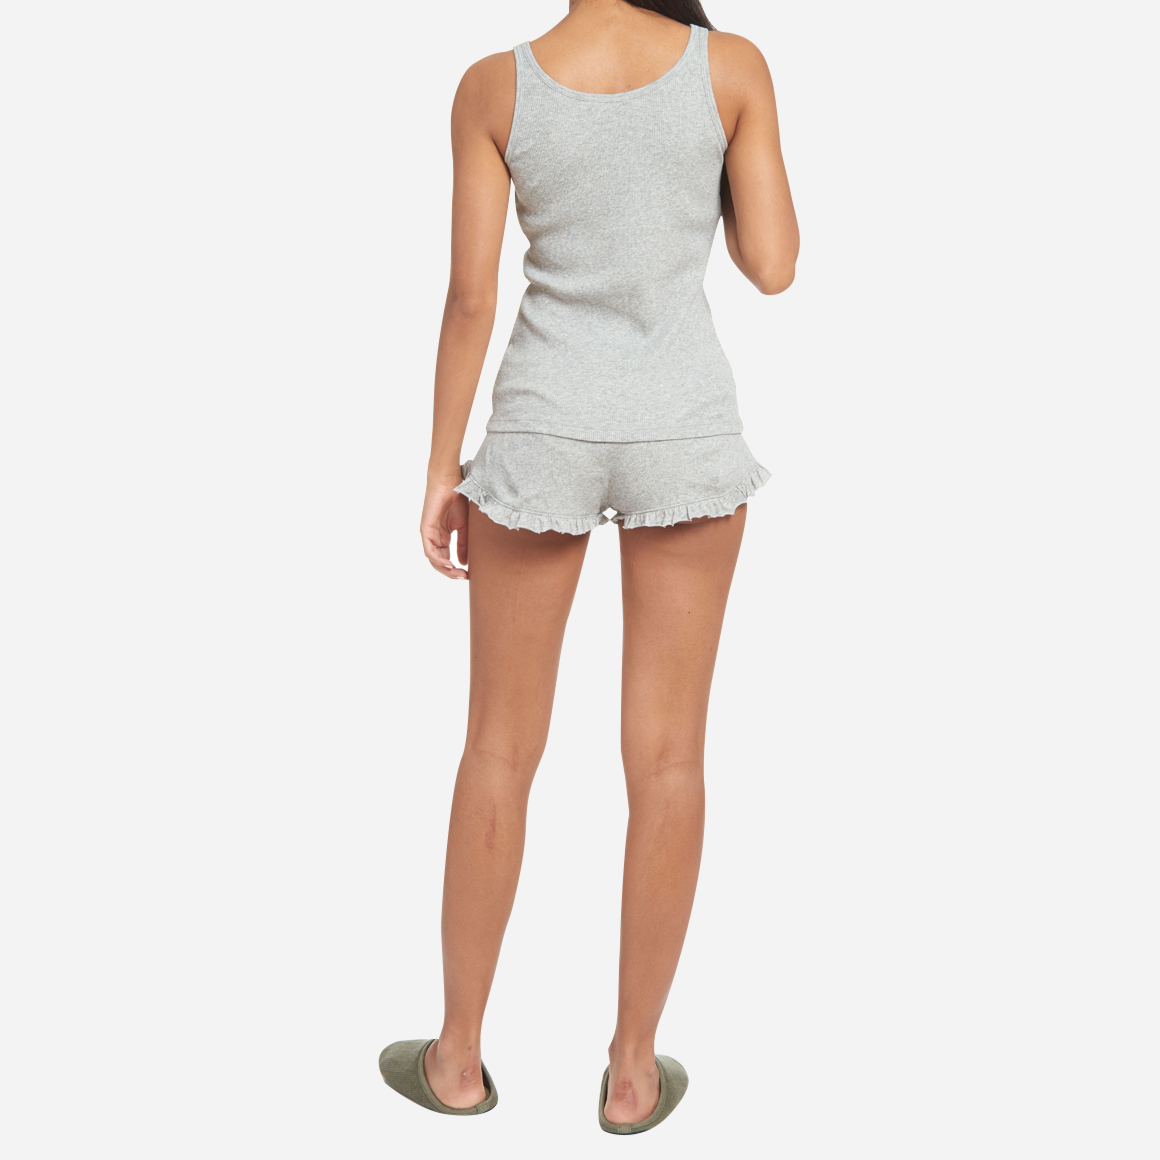 The design of the Raisa & Raffaela Set is as elegant as it is versatile. The classic fitted tank top has a flattering scoop neckline, while the cozy shorts offer a comfortable, yet flattering silhouette with an adorable ruffled edge. The elastic waistband with drawstring ensures a personalized fit for all body types.